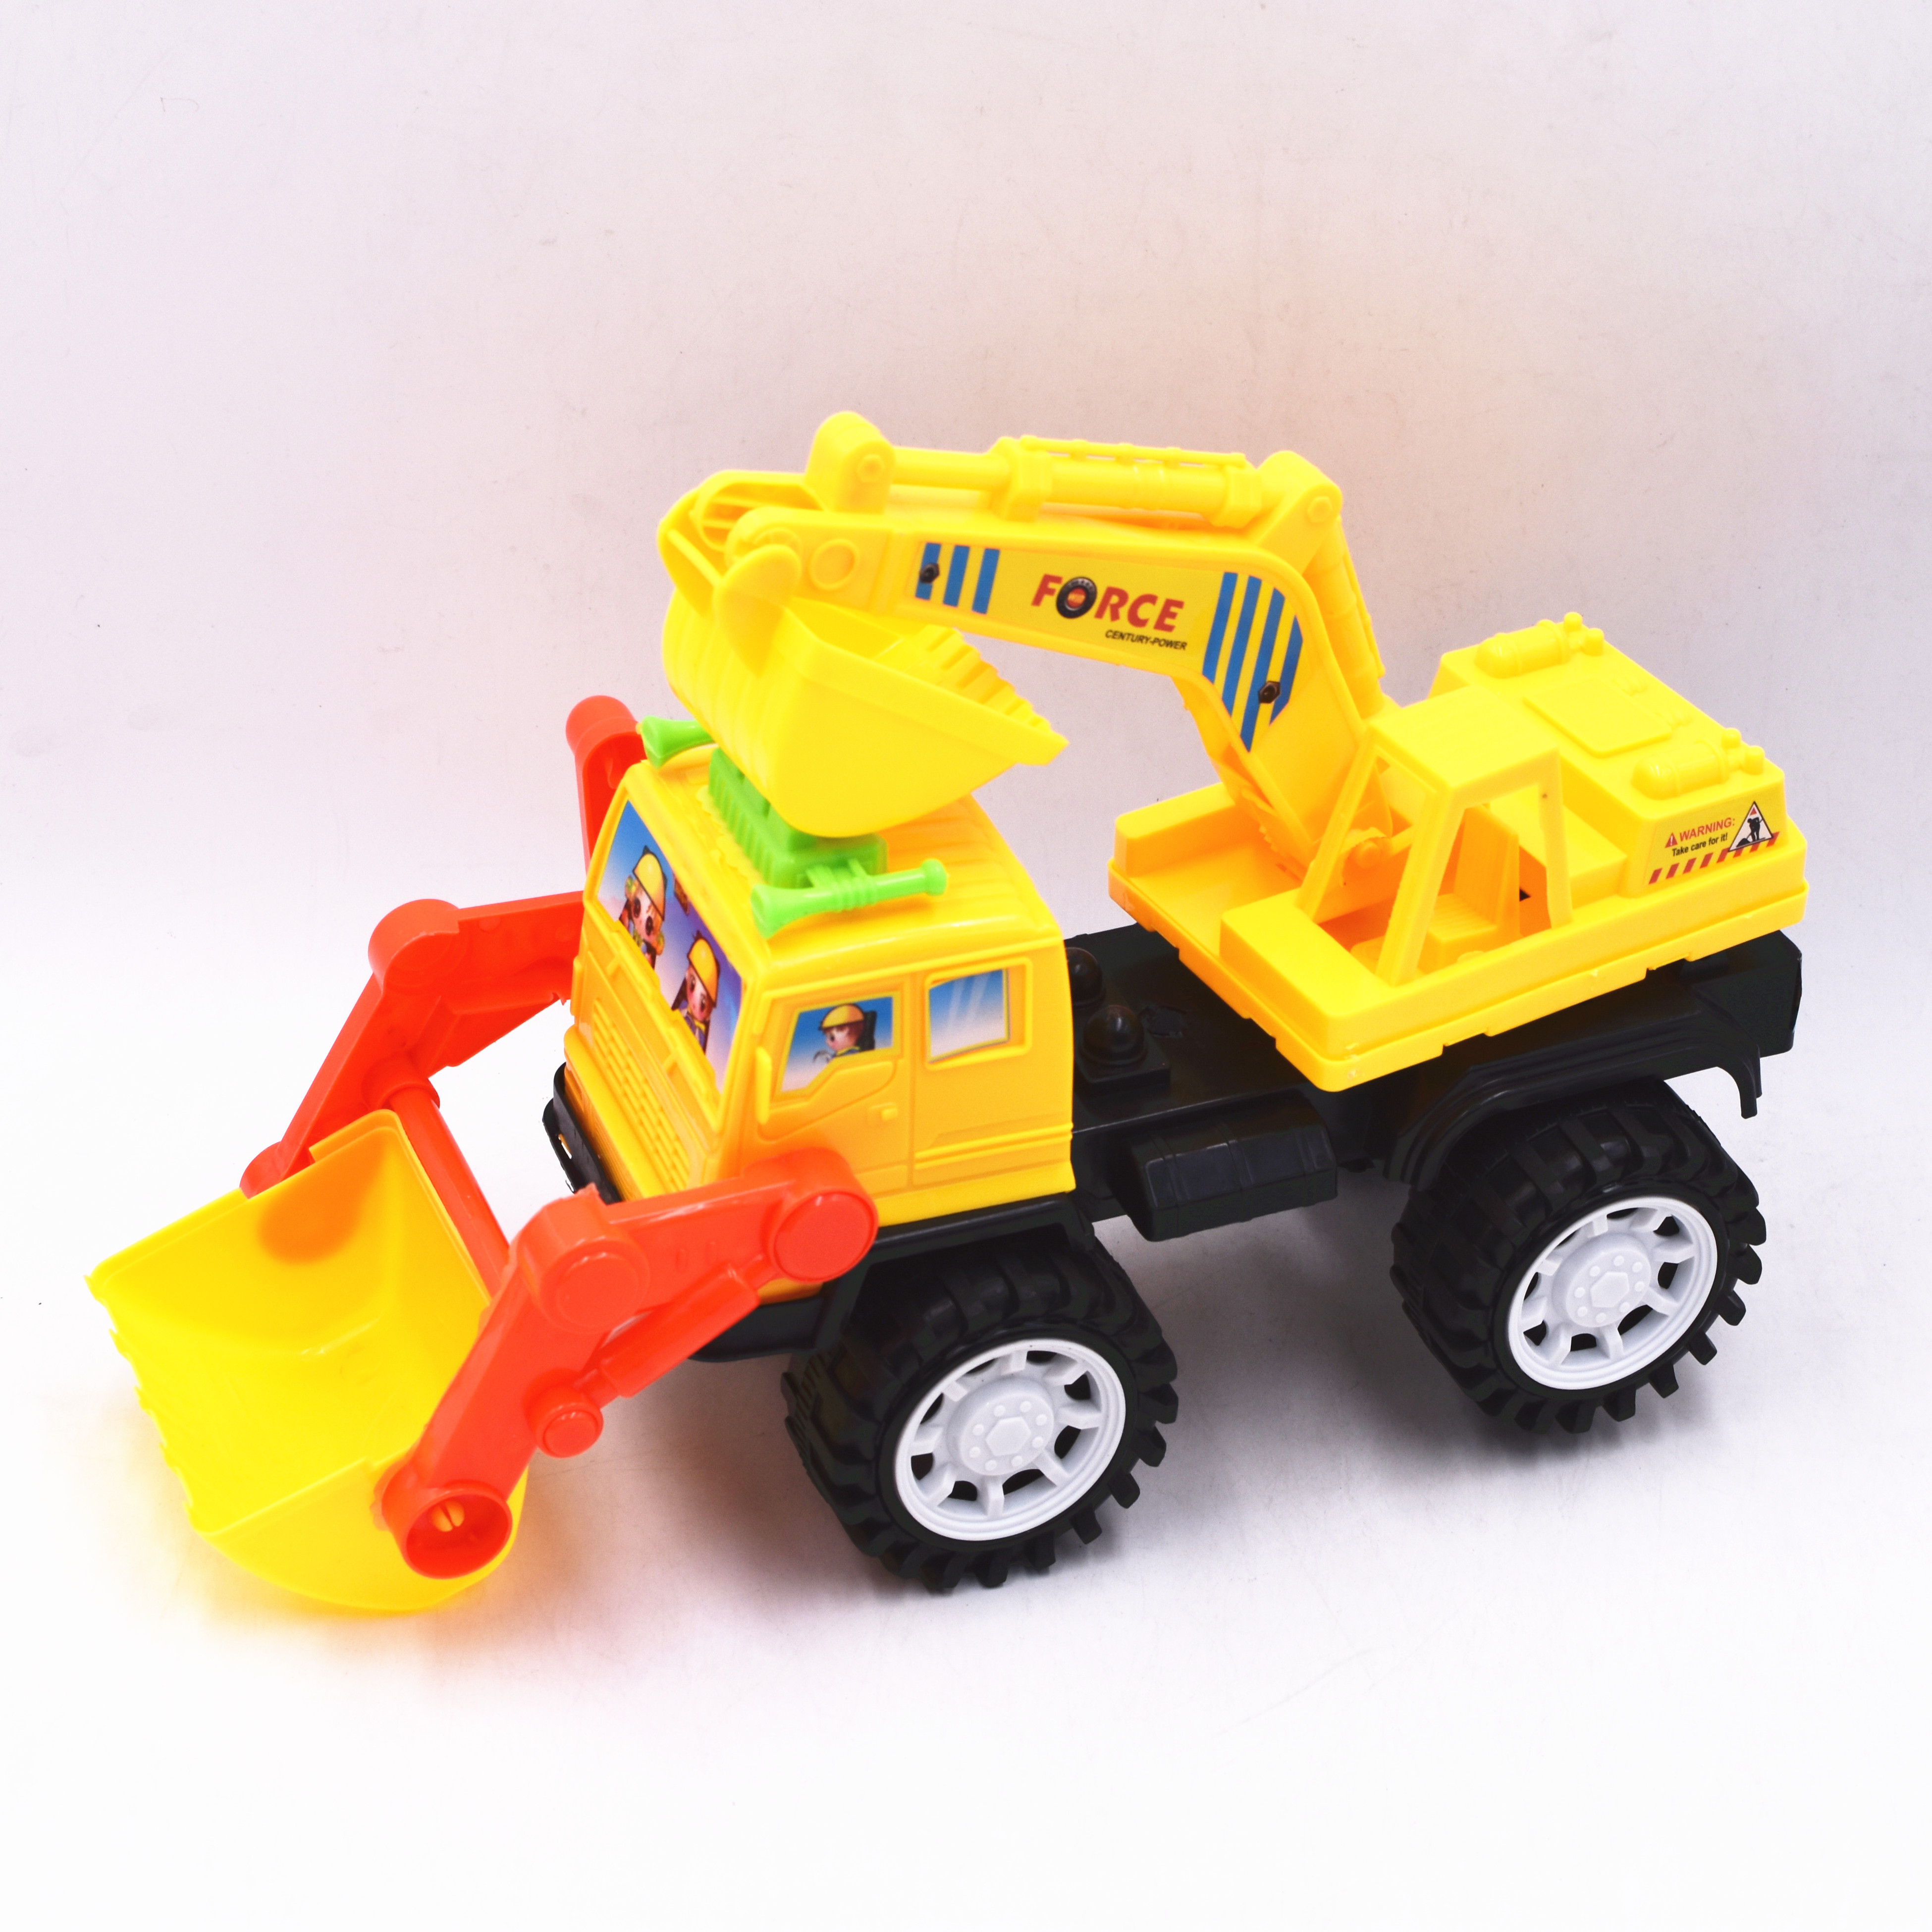 FREE WHEEL TRUCK TOY LY1720